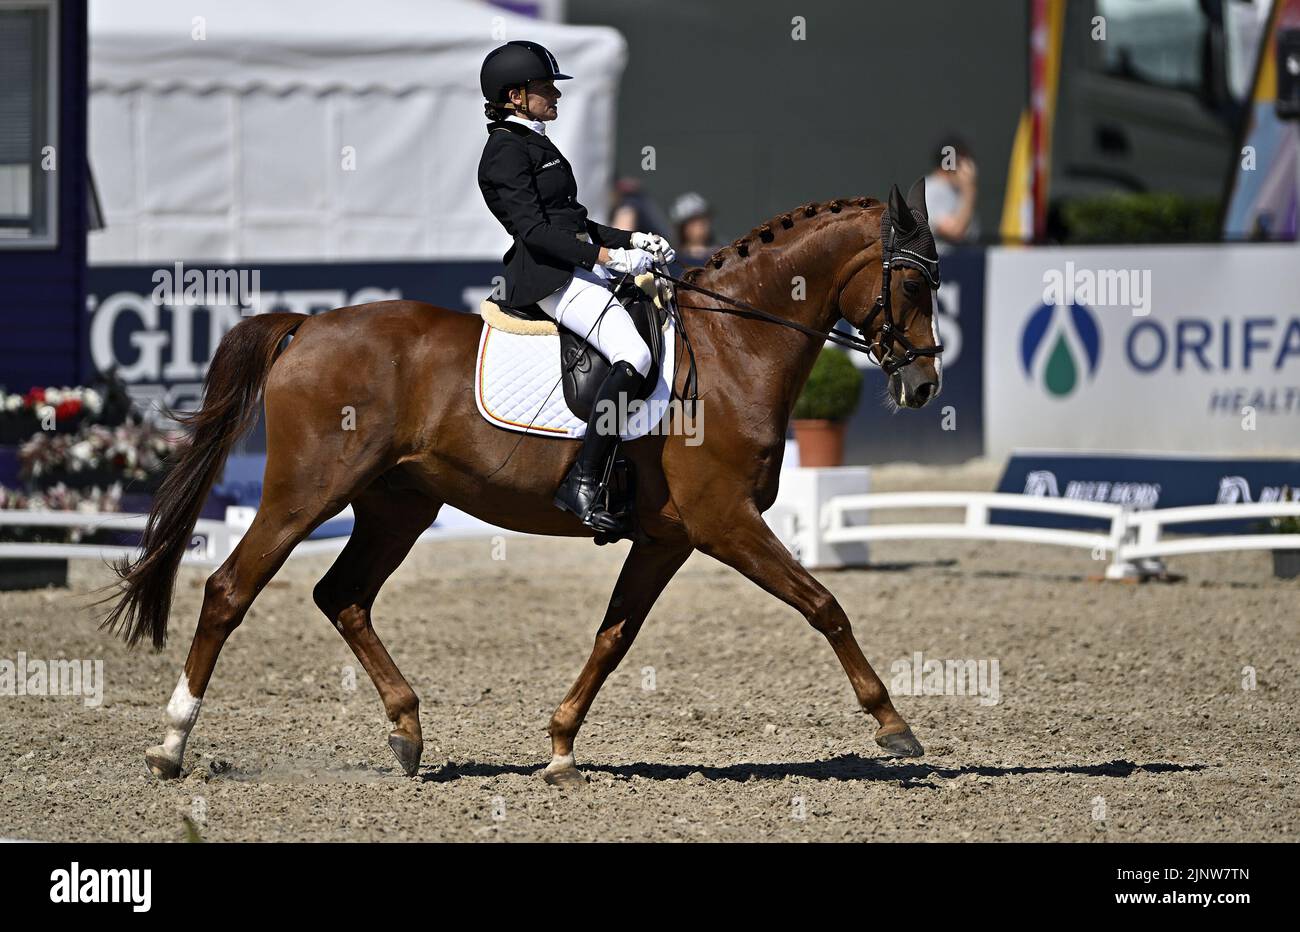 Herning, Denmark. 13th Aug, 2022. World Equestrian Games.Barbara Minneci (BEL) riding STUART during the FEI Para Dressage Team championships - Grade III. Credit: Sport In Pictures/Alamy Live News Stock Photo